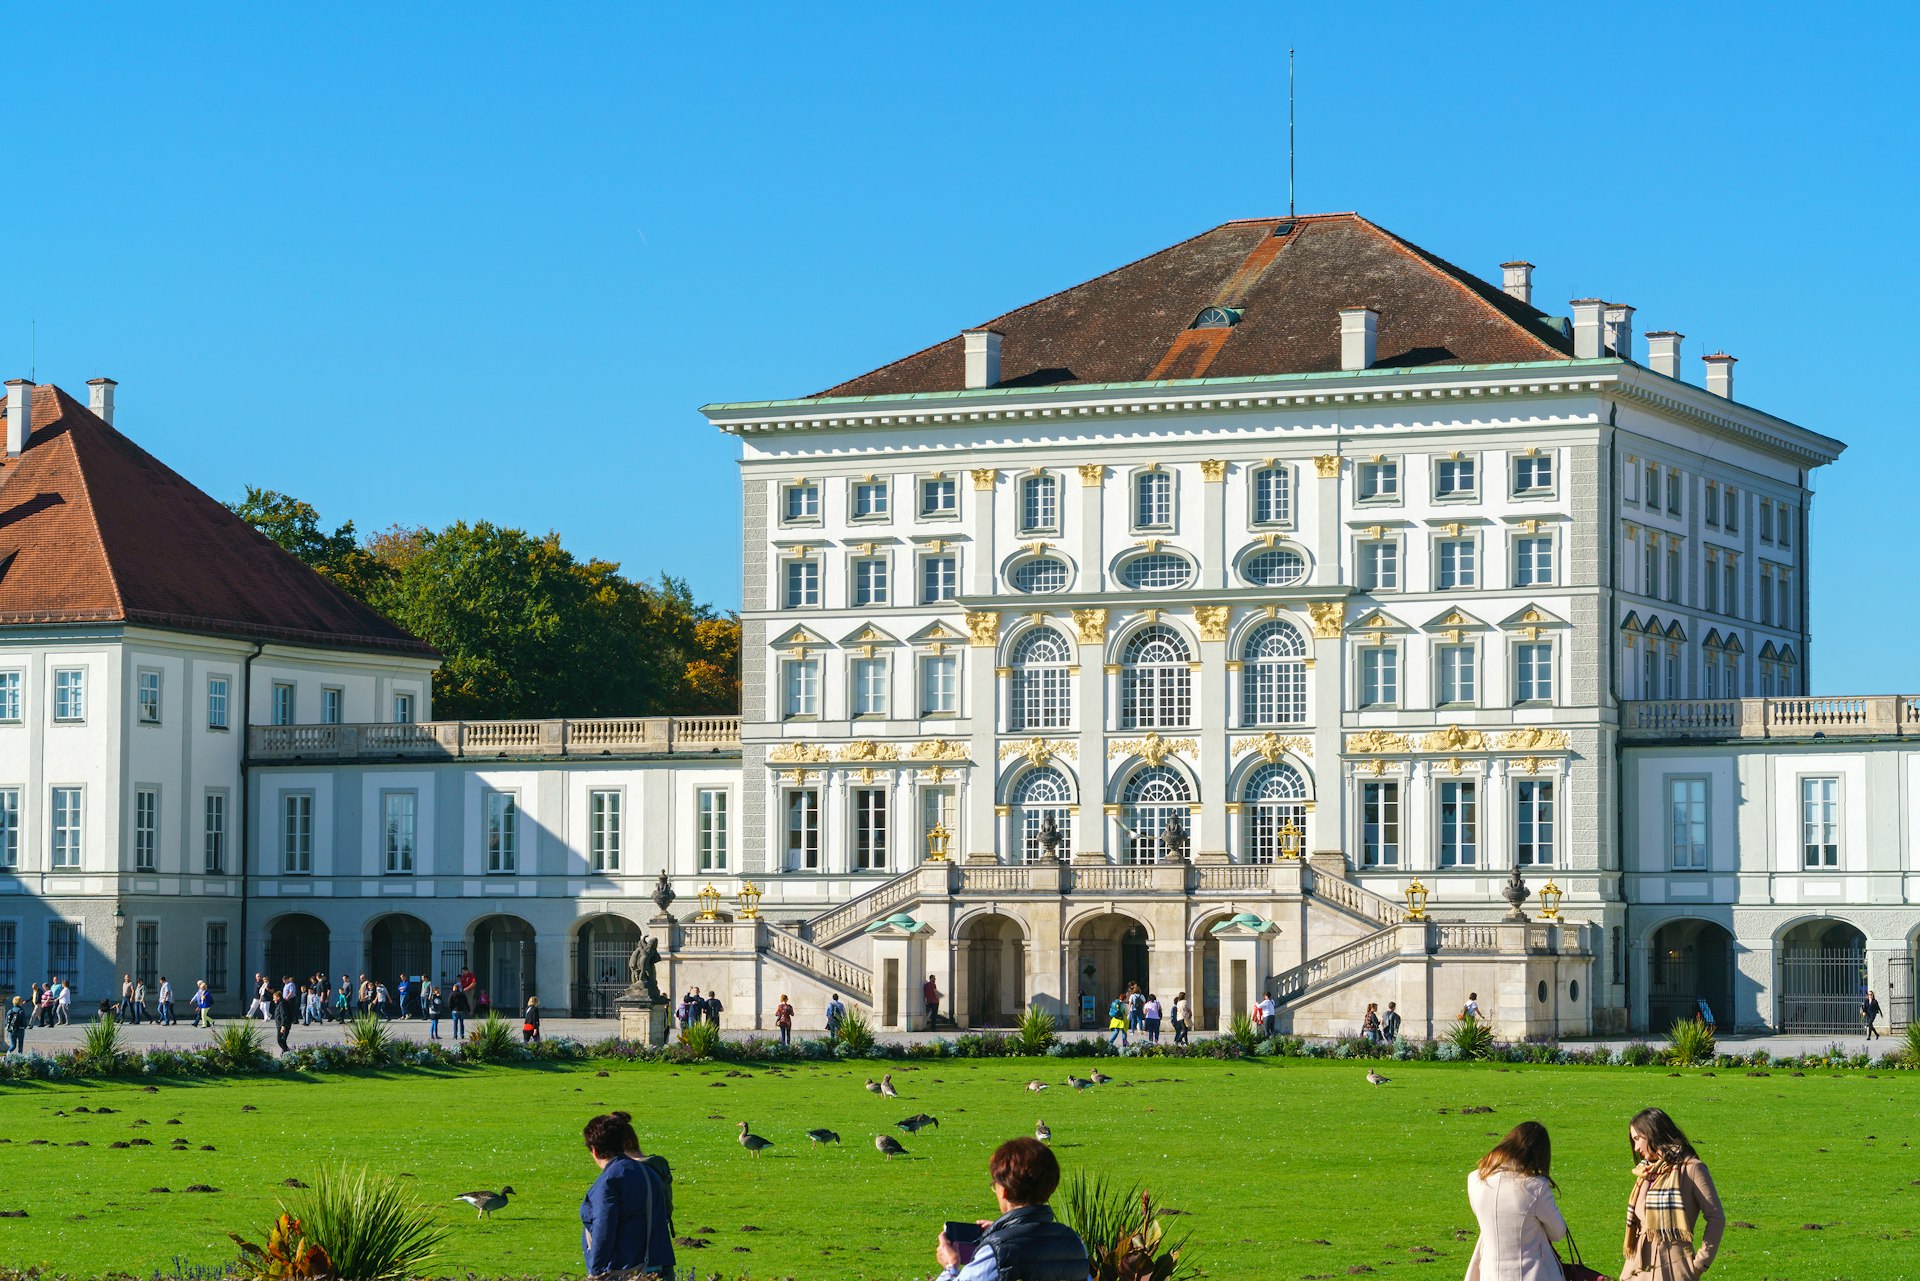 Visitors on the lawn in front of the Nymphenburg Palace, Munich